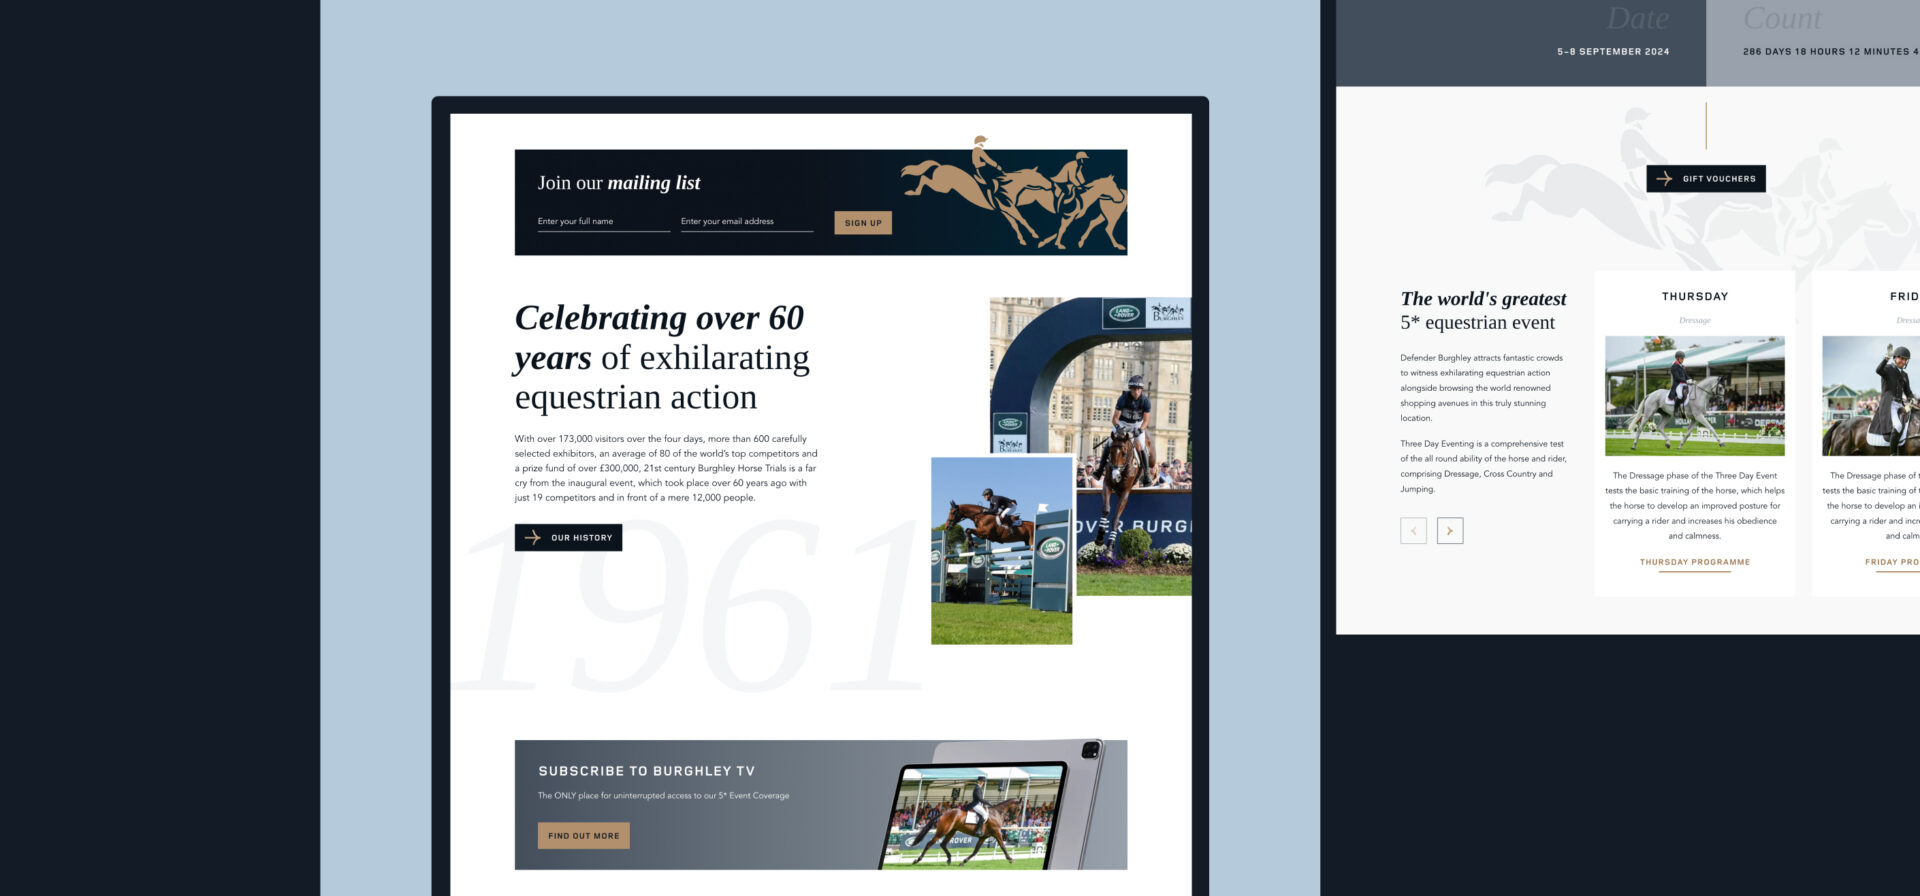 04 Burghley Horse Trials webpage assets and brand horse illustration